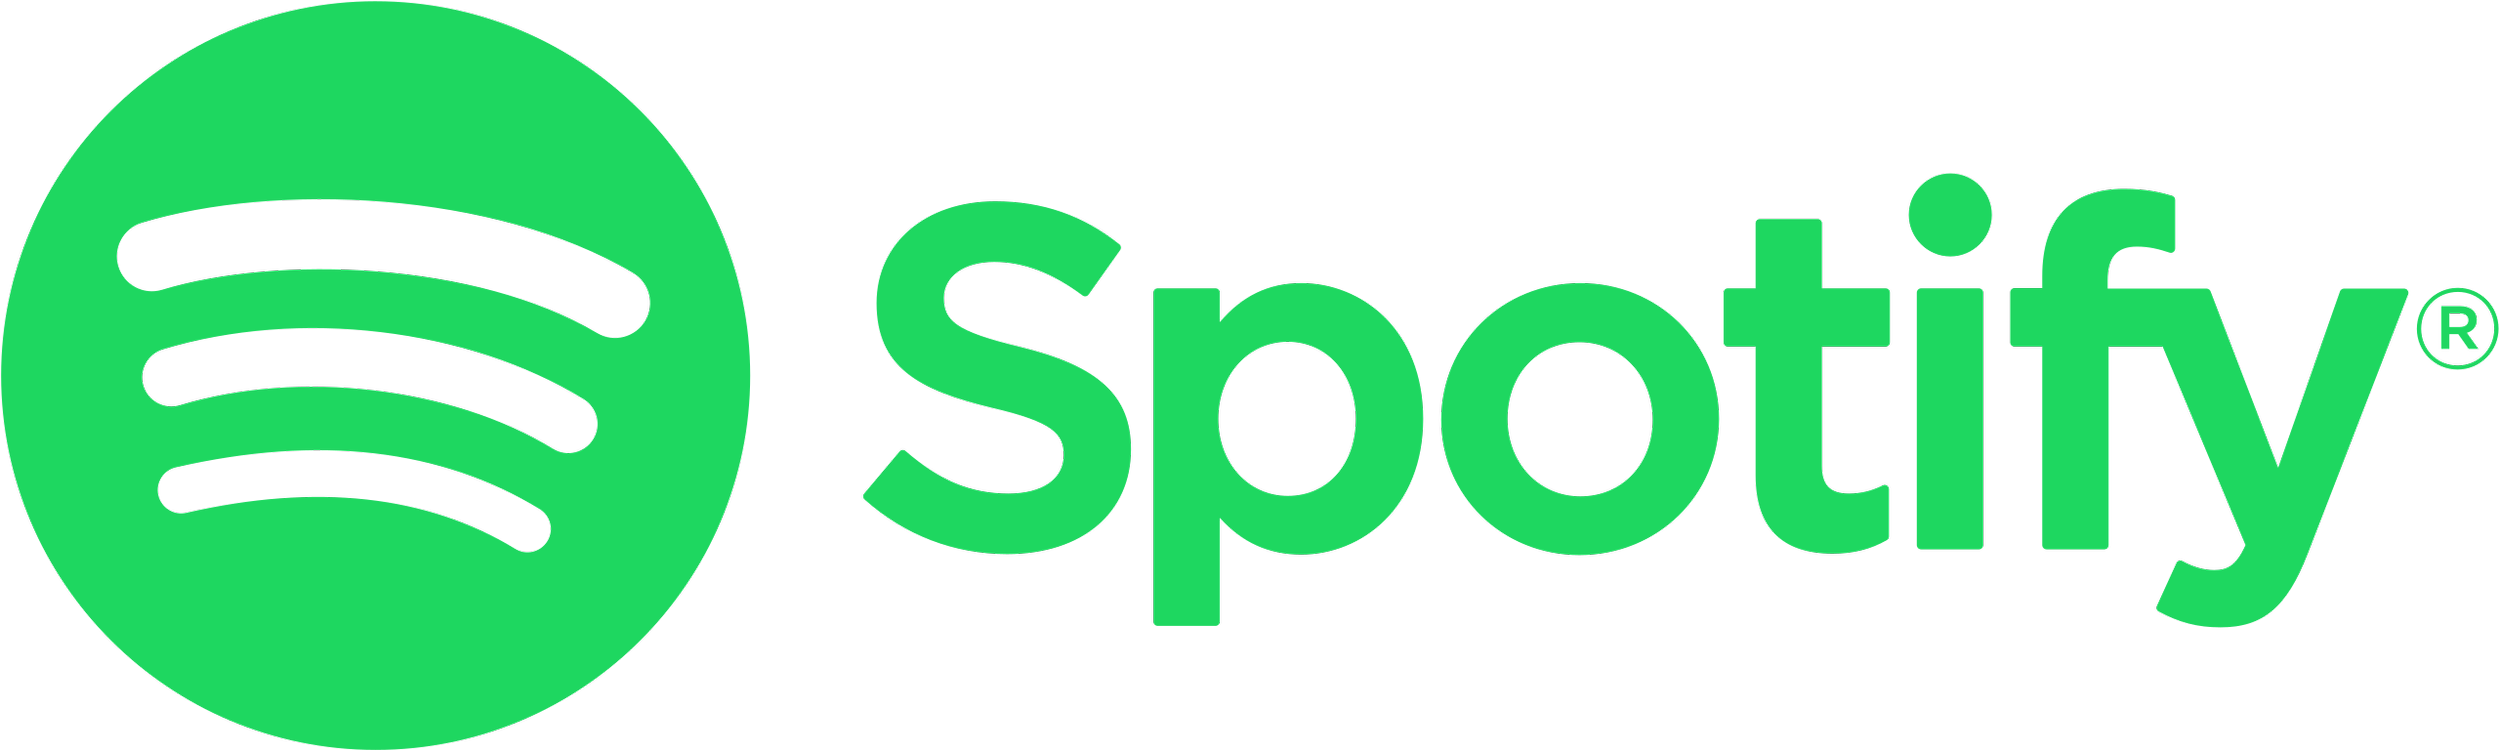 Spotify_logo_with_text.svg.png